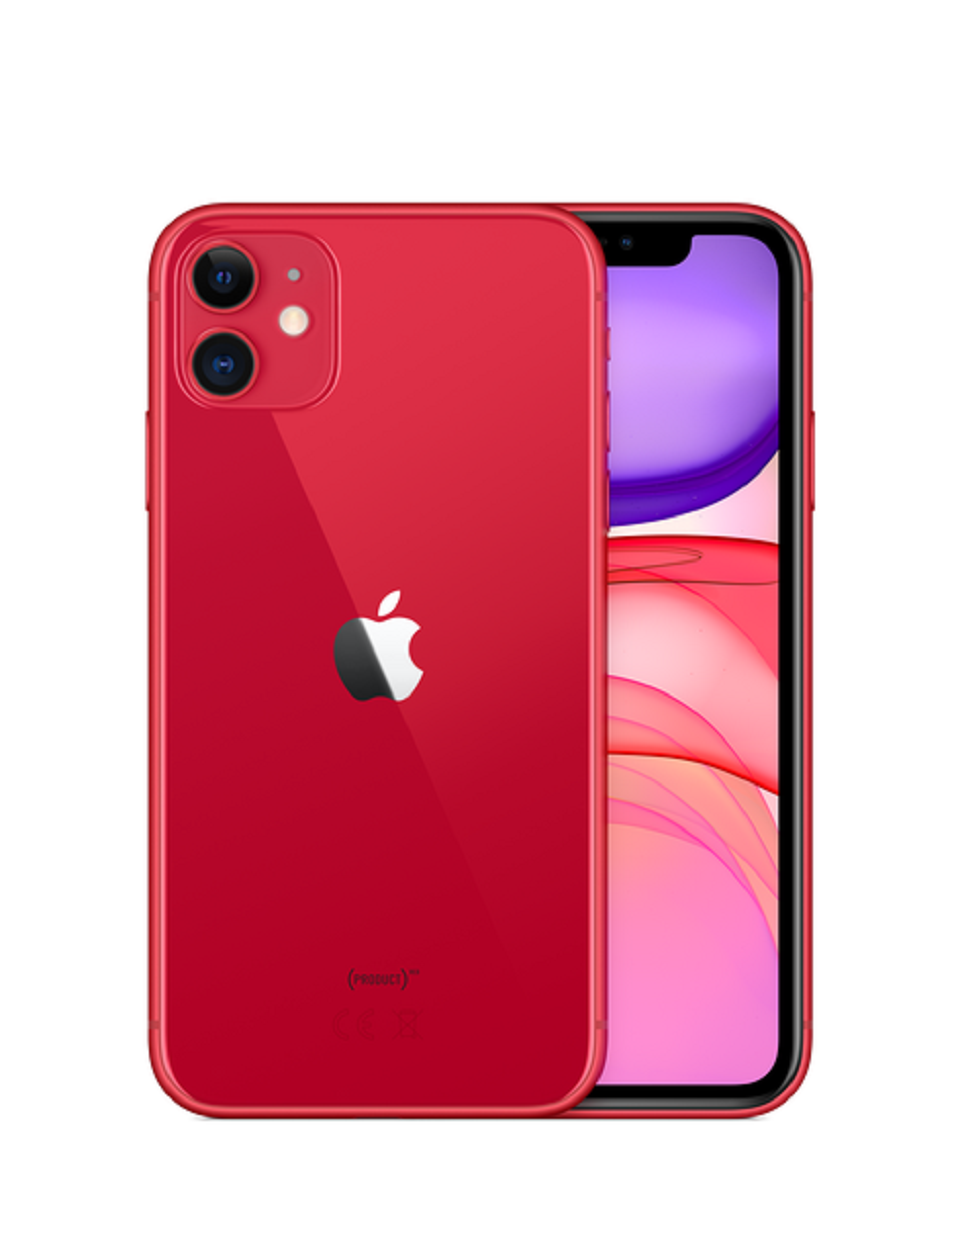 Apple 11 (Product)RED